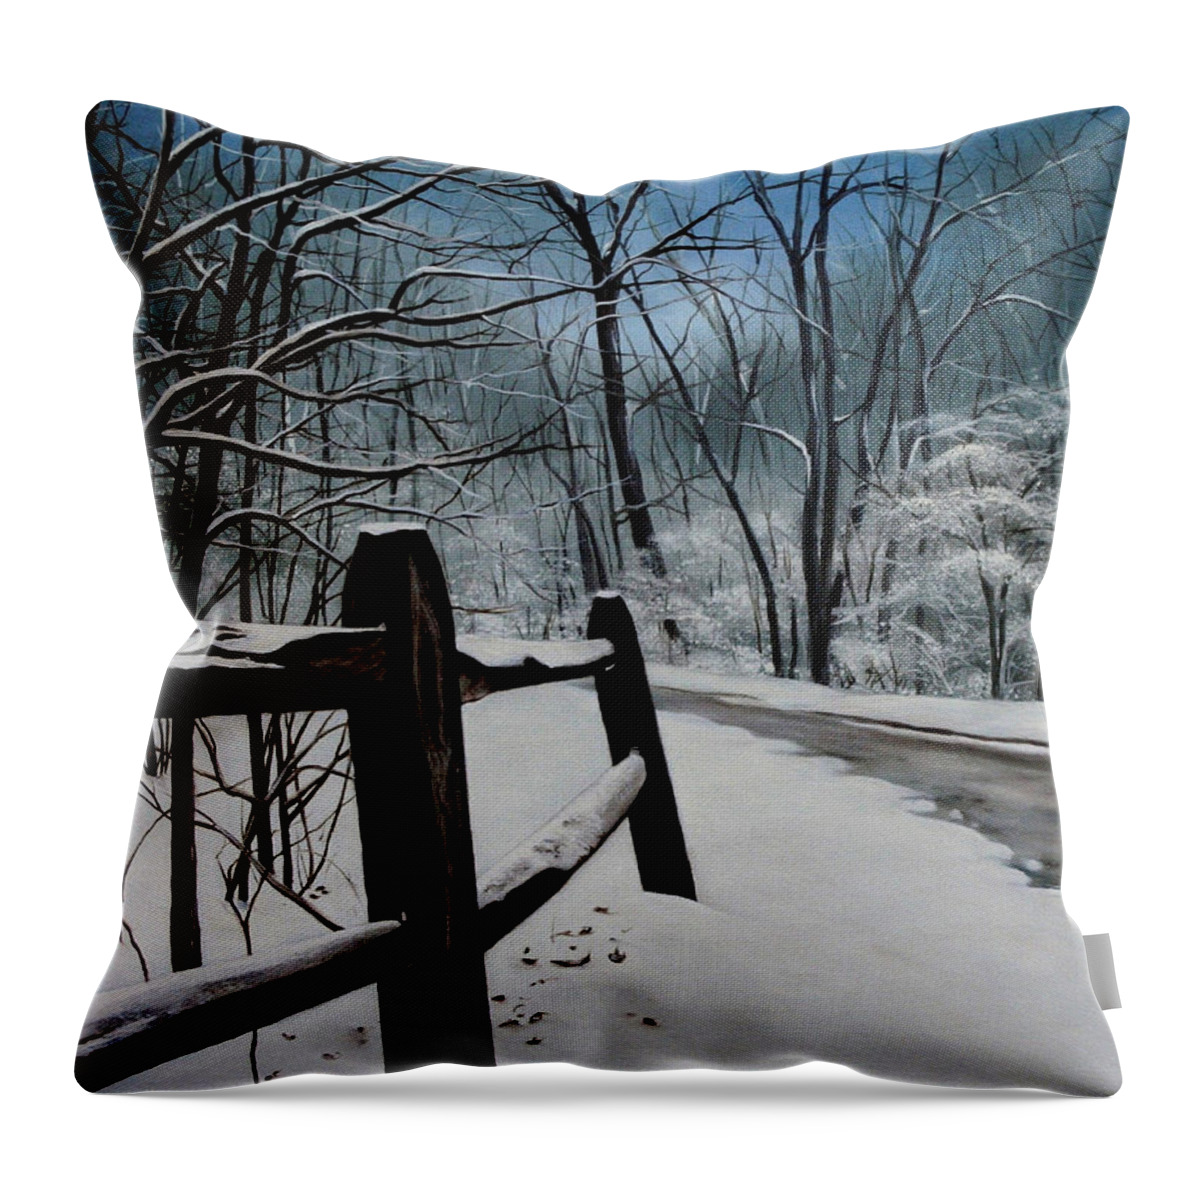 Path Throw Pillow featuring the painting The Path Ahead by Daniel Carvalho